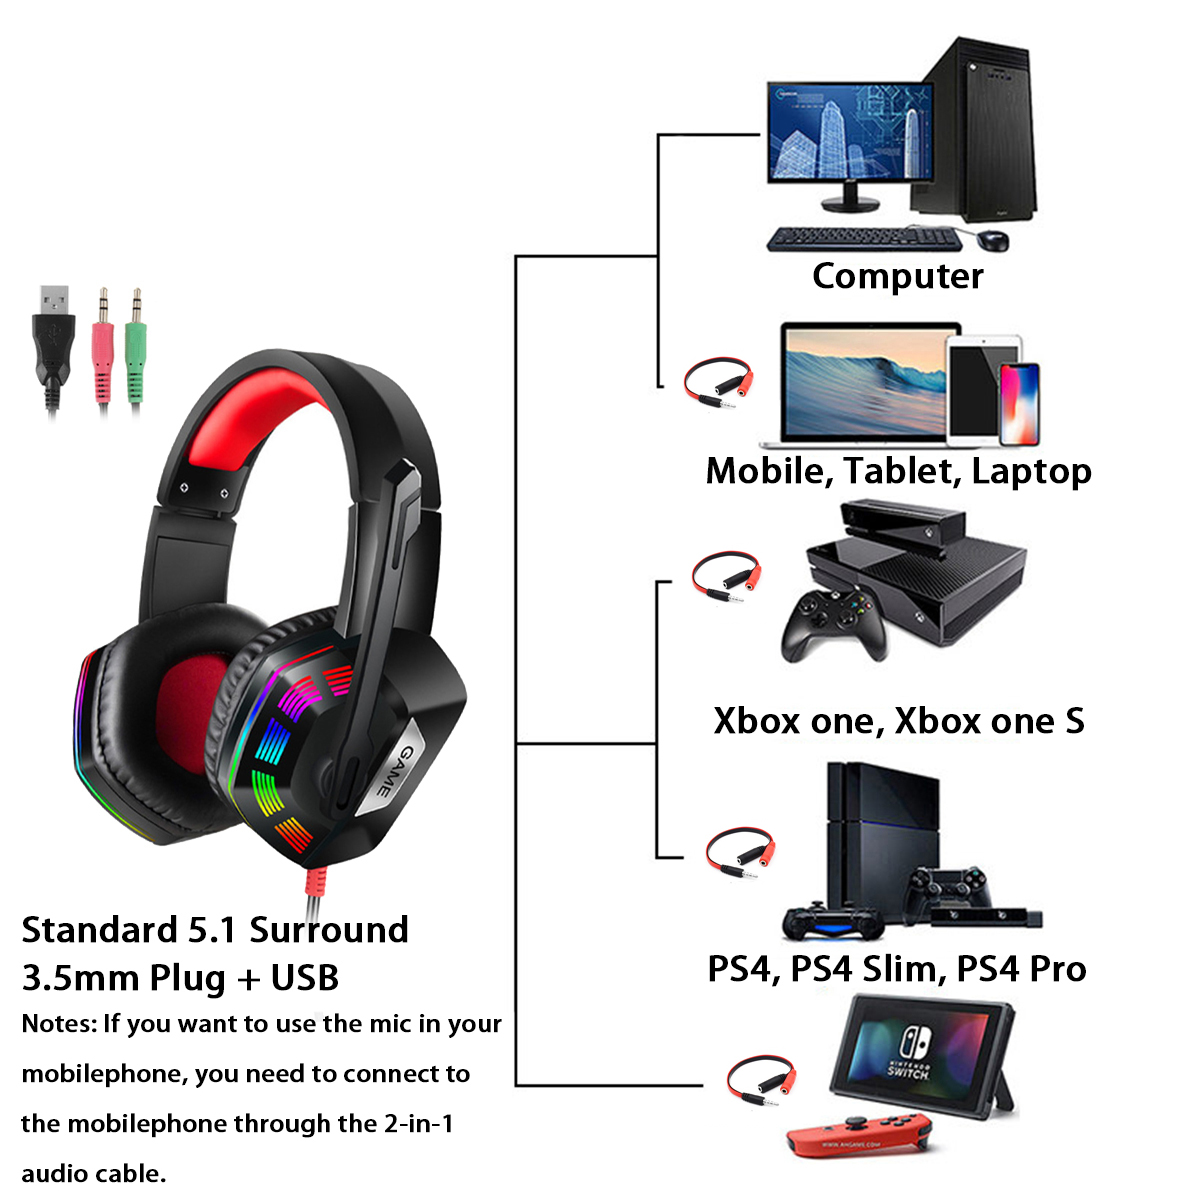 M1-Gaming-Headset-Surround-Sound-Music-Earphones-USB-71--35mm-Wired-RGB-Backlight-Game-Headphones-wi-1827492-18